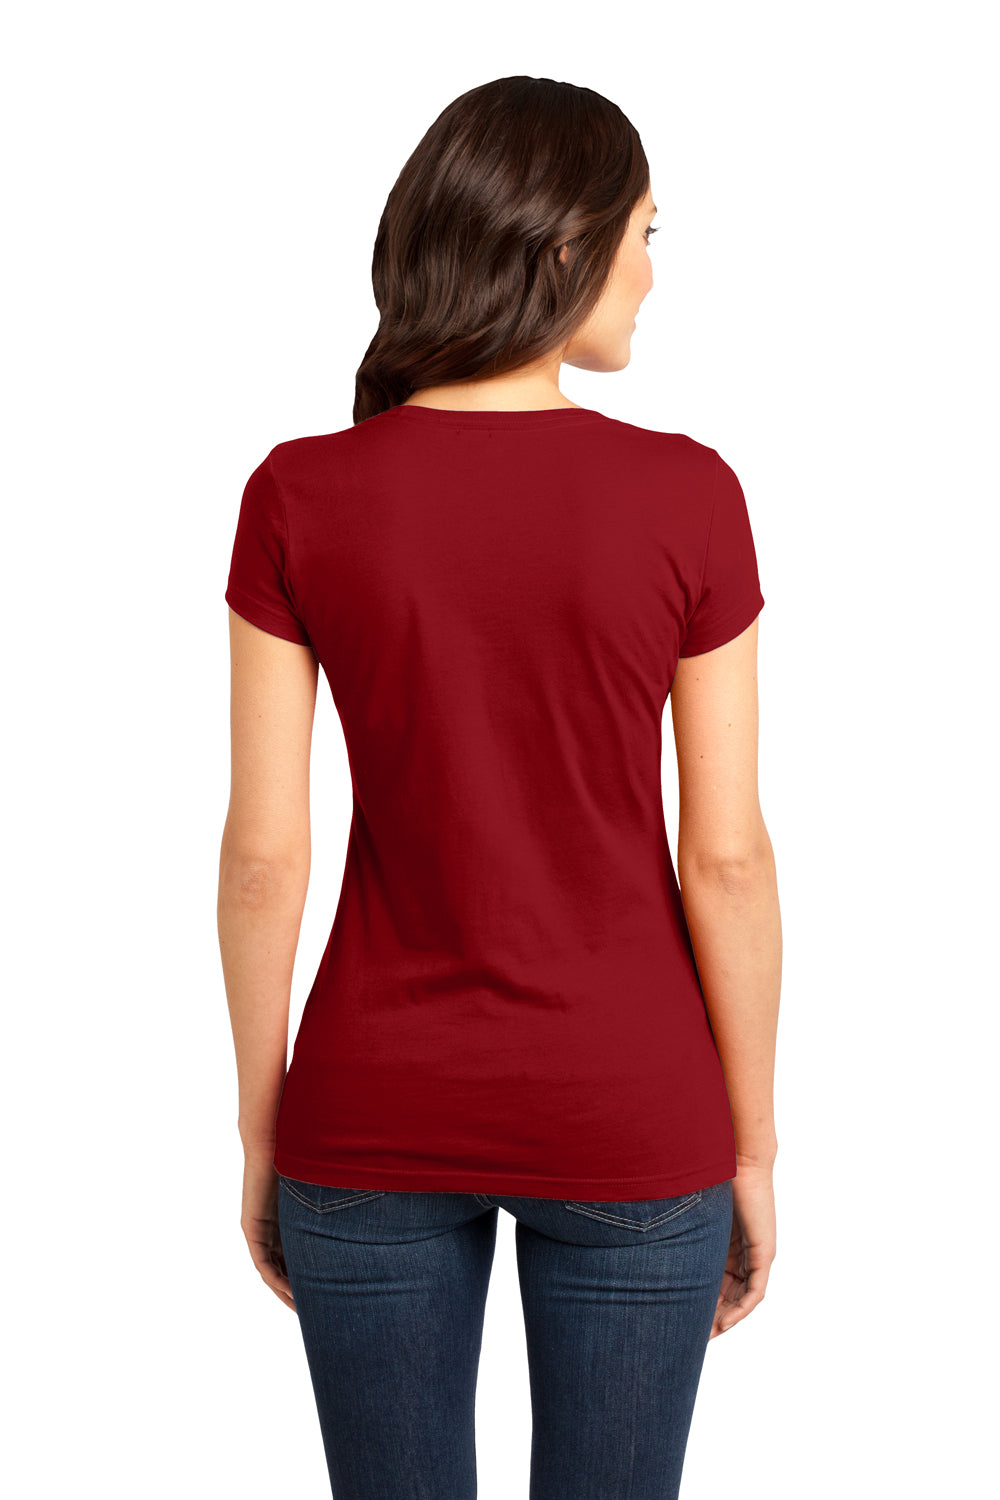 District DT6001 Womens Very Important Short Sleeve Crewneck T-Shirt Red Back